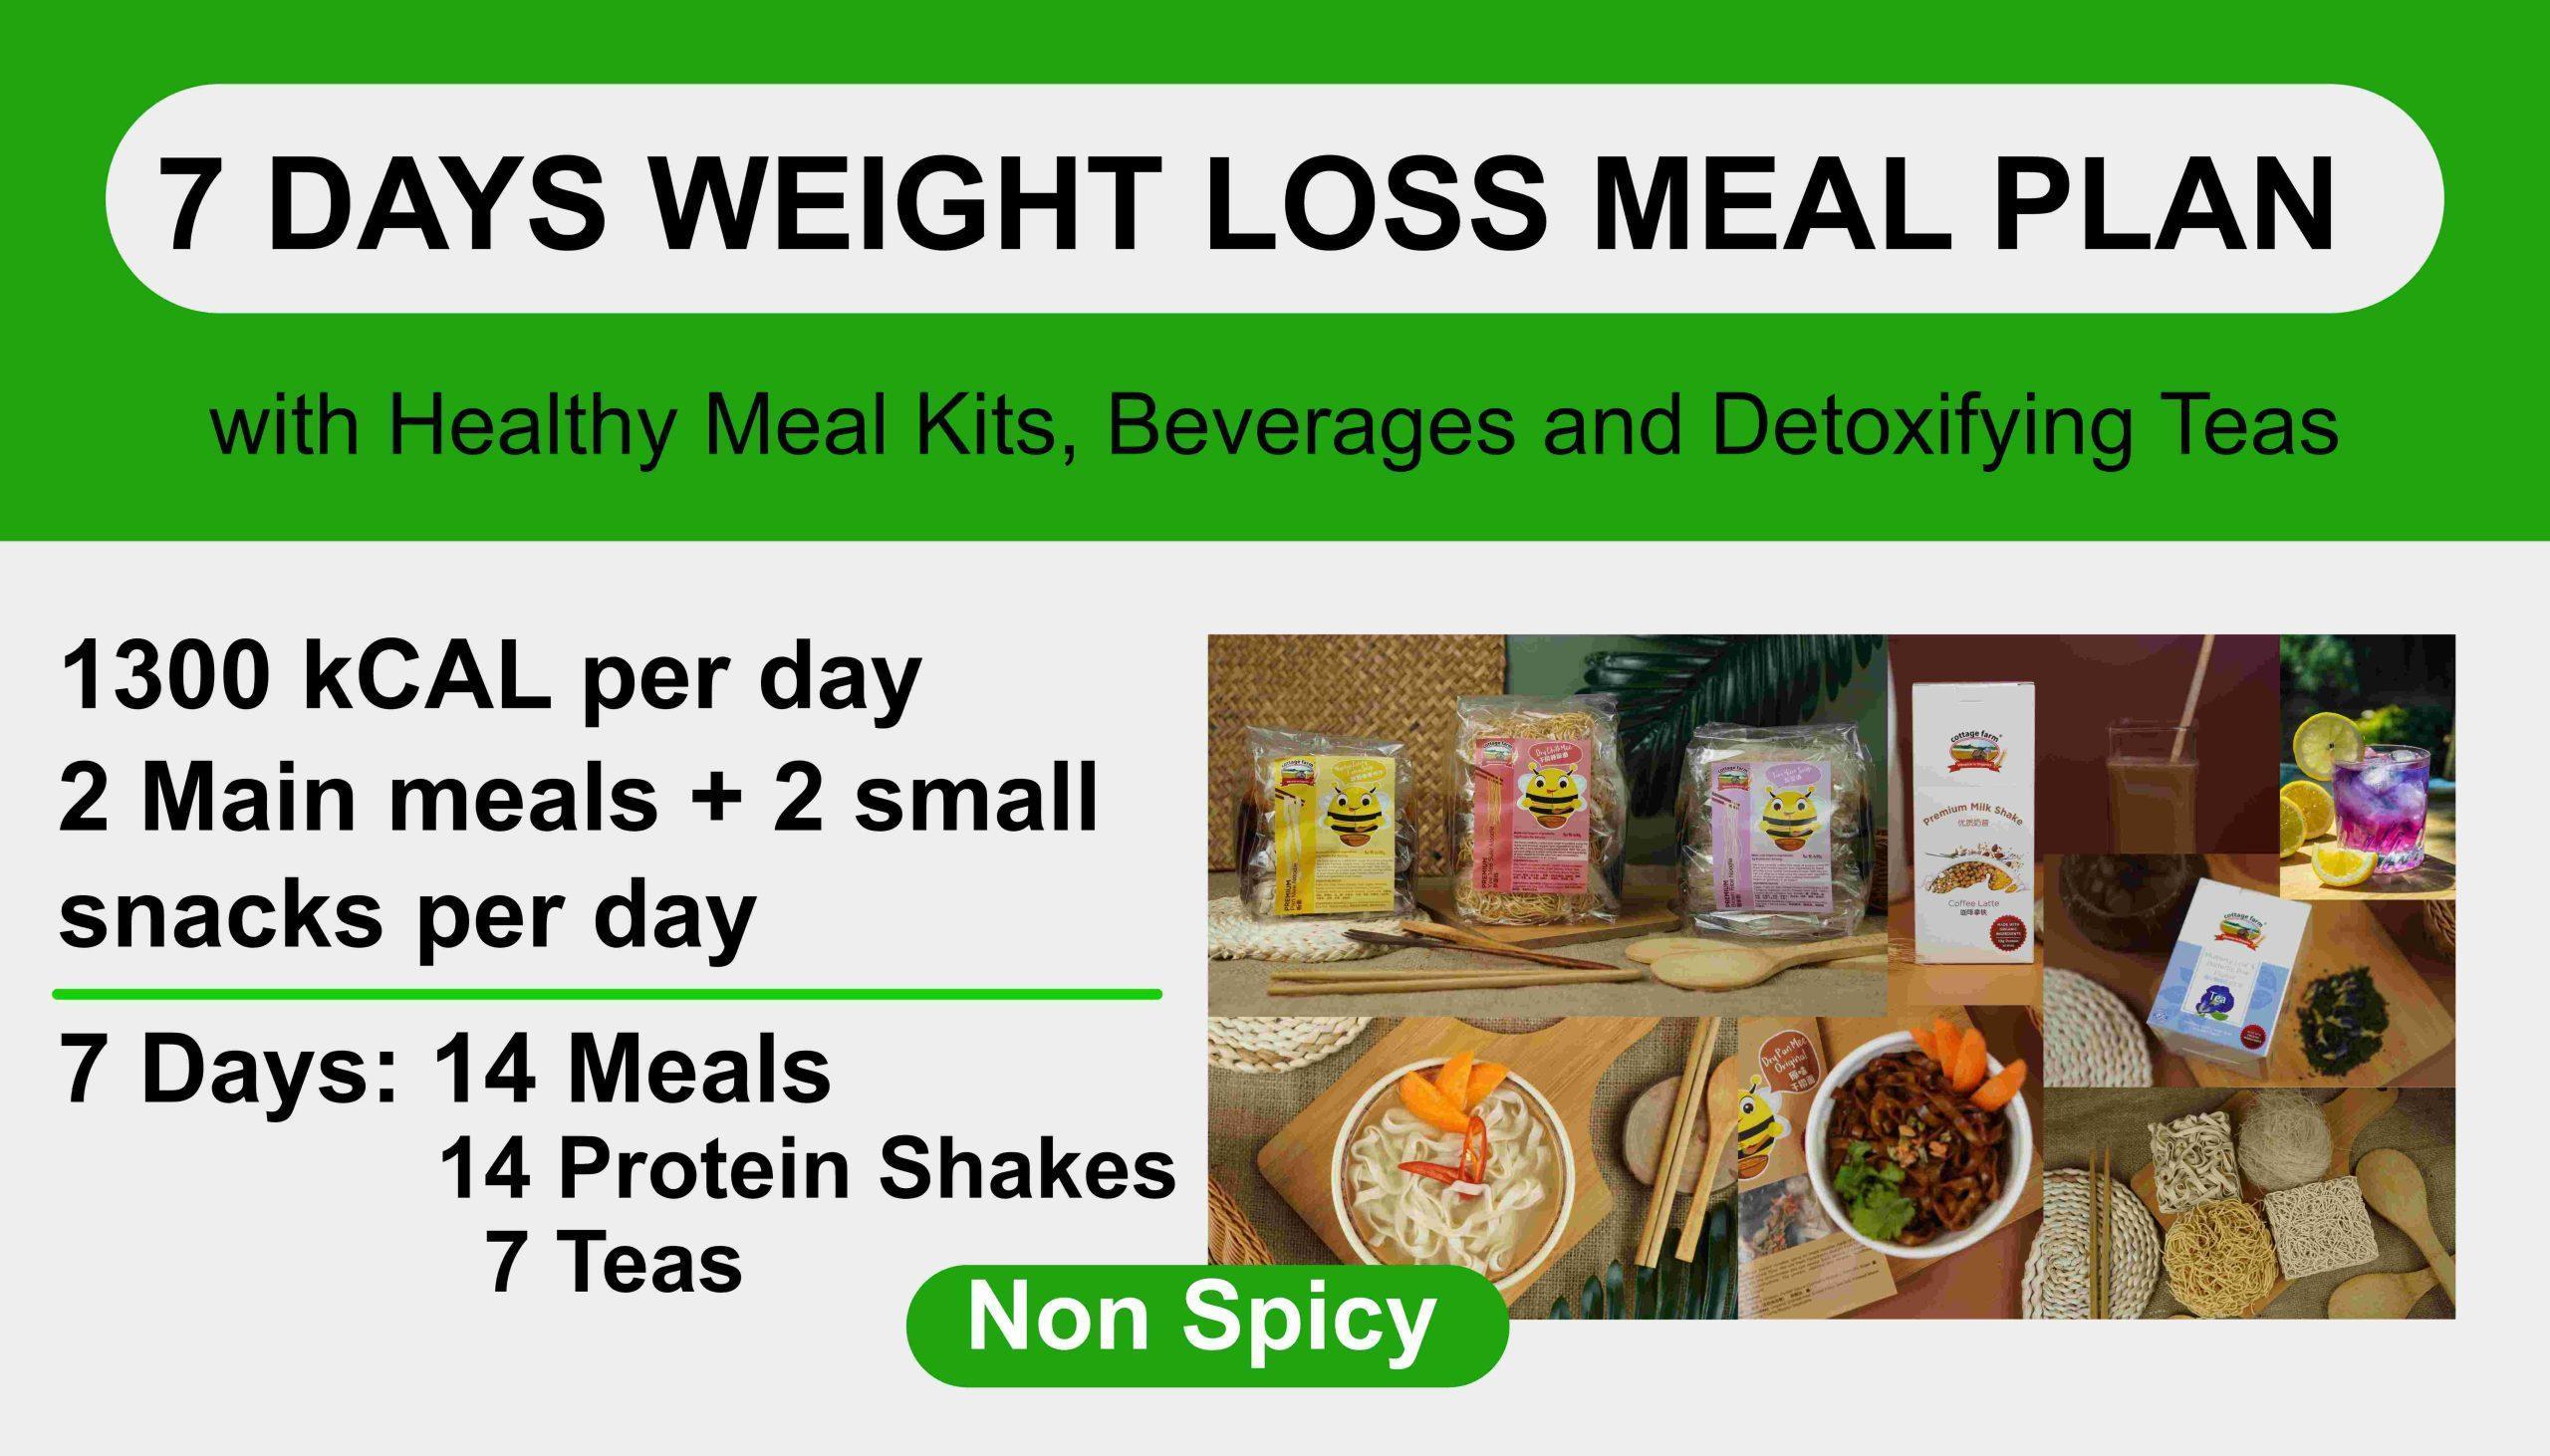 7 Days Weight Loss Meal Plan Non-Spicy 1300kCAL